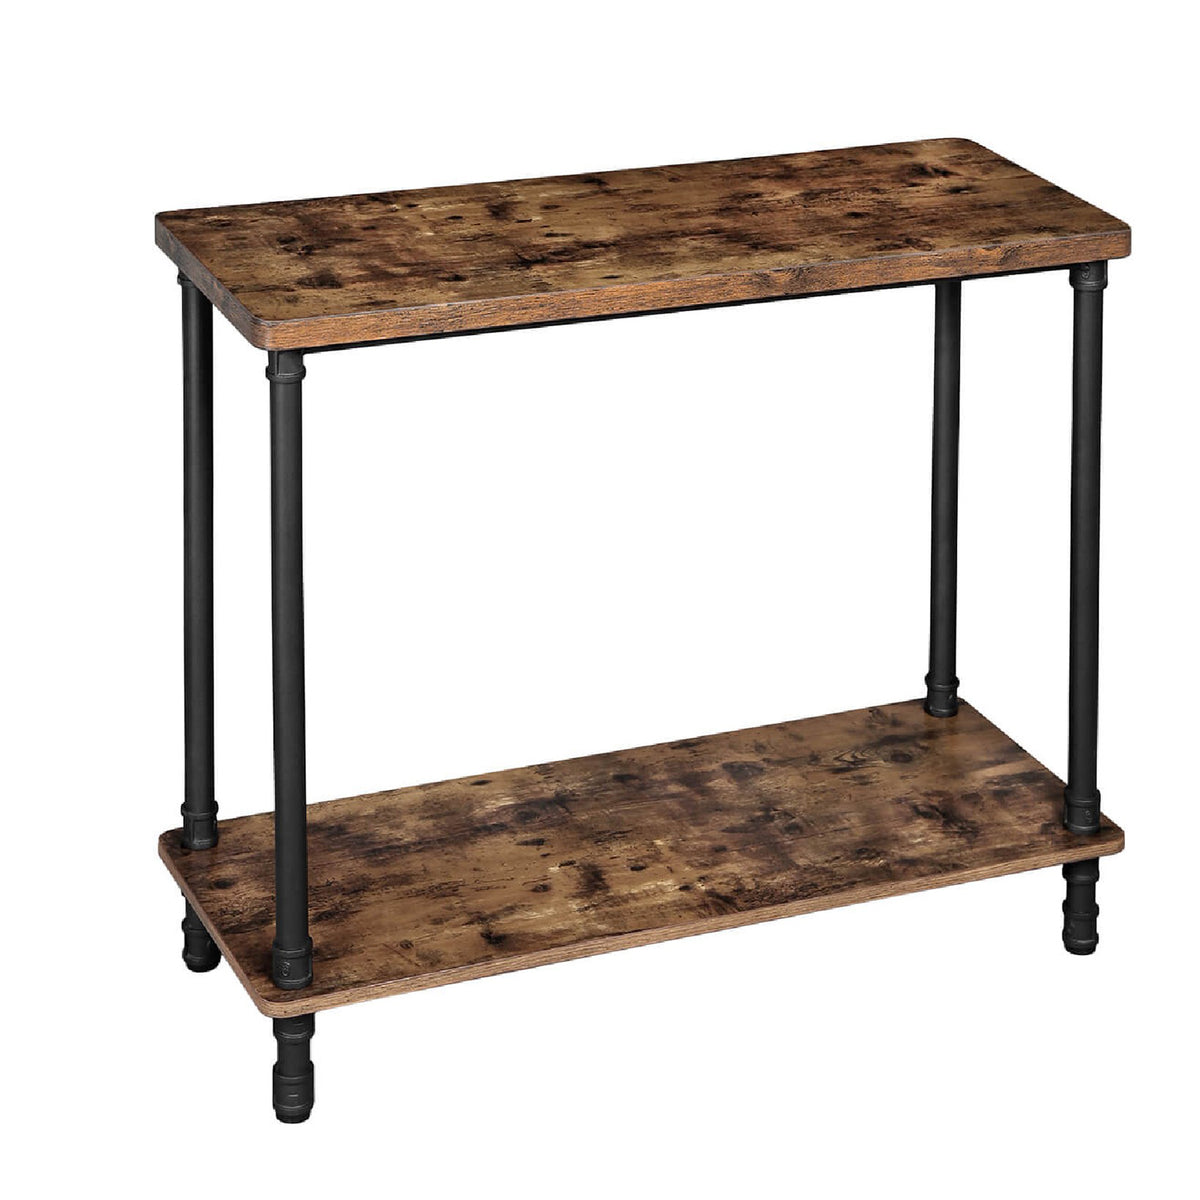 Wood and Metal Frame Console Table with Open Bottom Shelf, Rustic Brown - BM215748